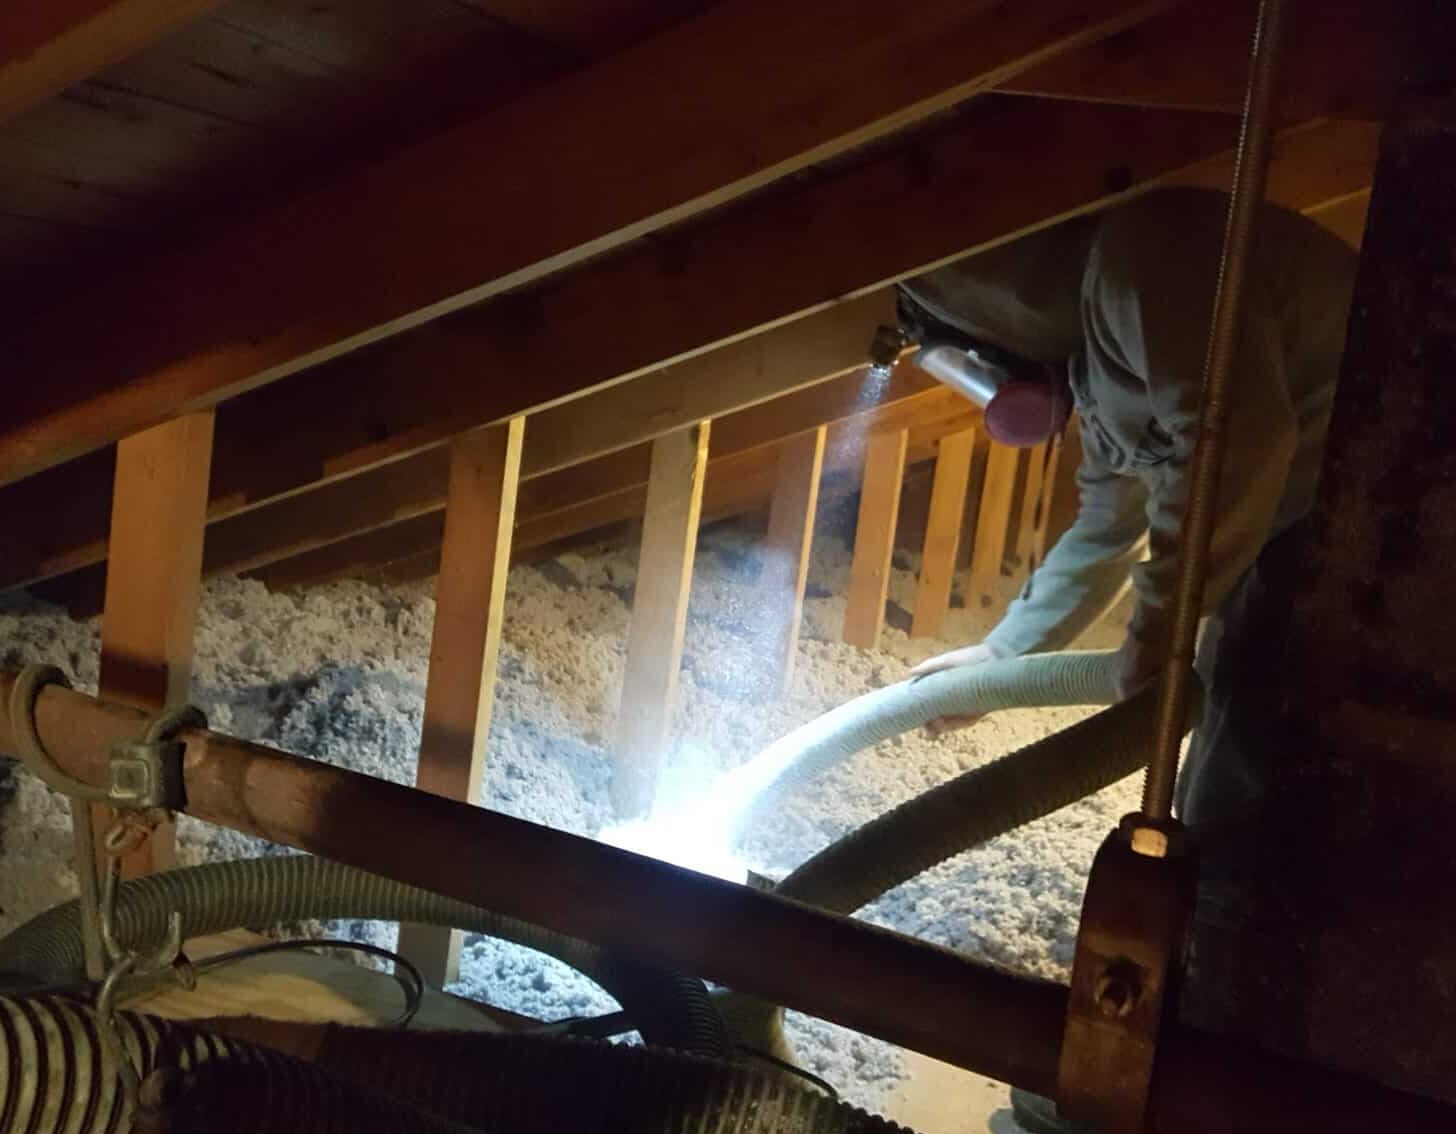 A Sanfilippo's worker in the process of insulating an attic.